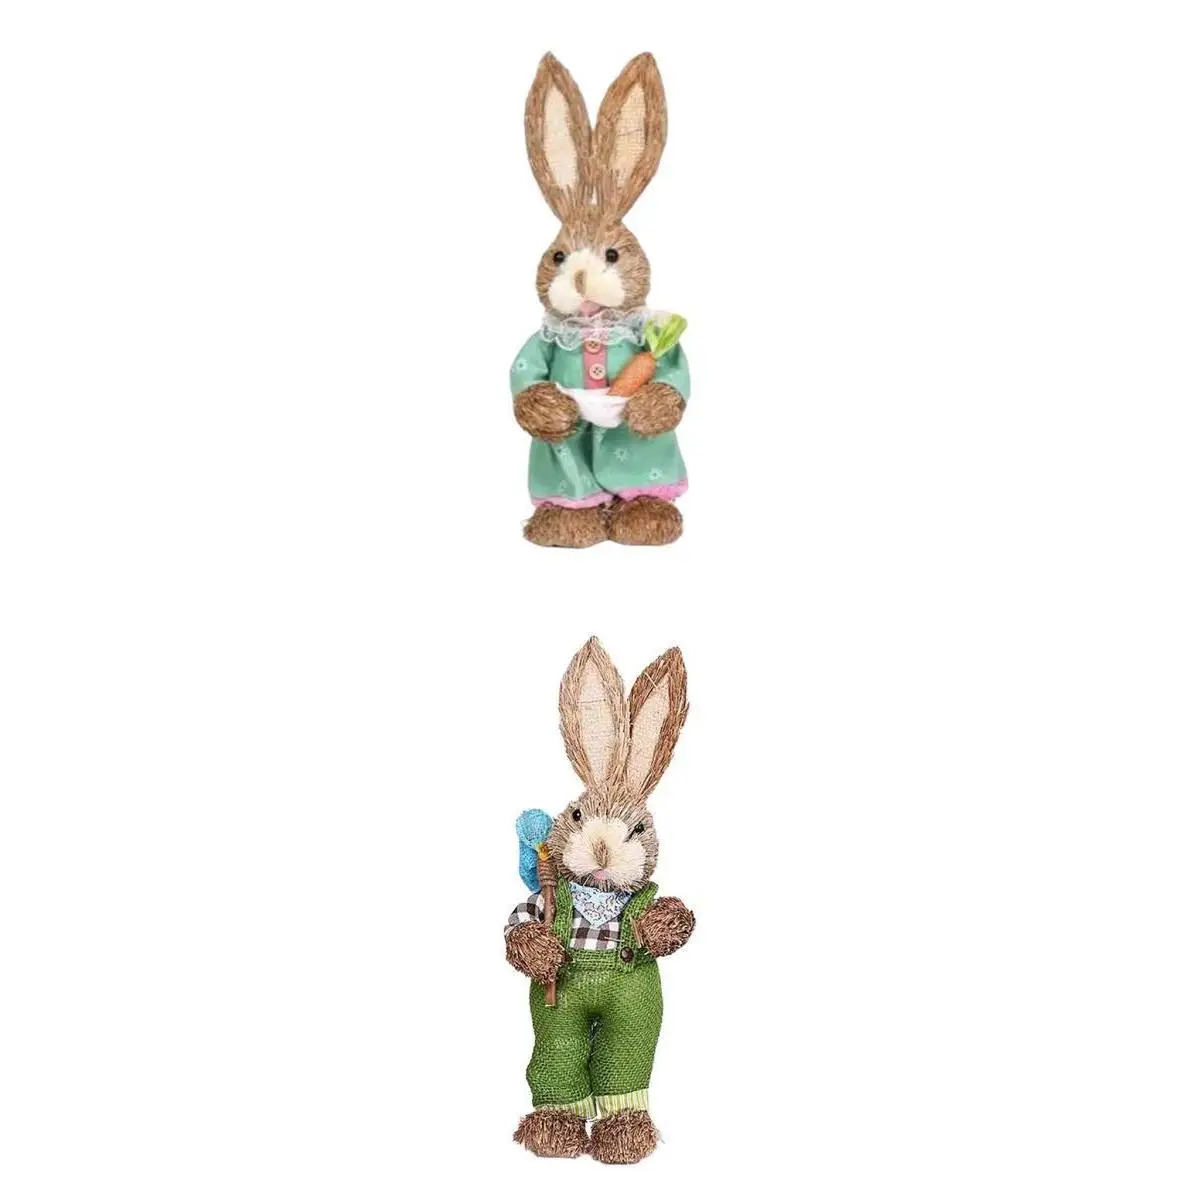 2Pcs Natural Sisal Straw Standing Easter Bunny Figures Ornament 32cm Gifts